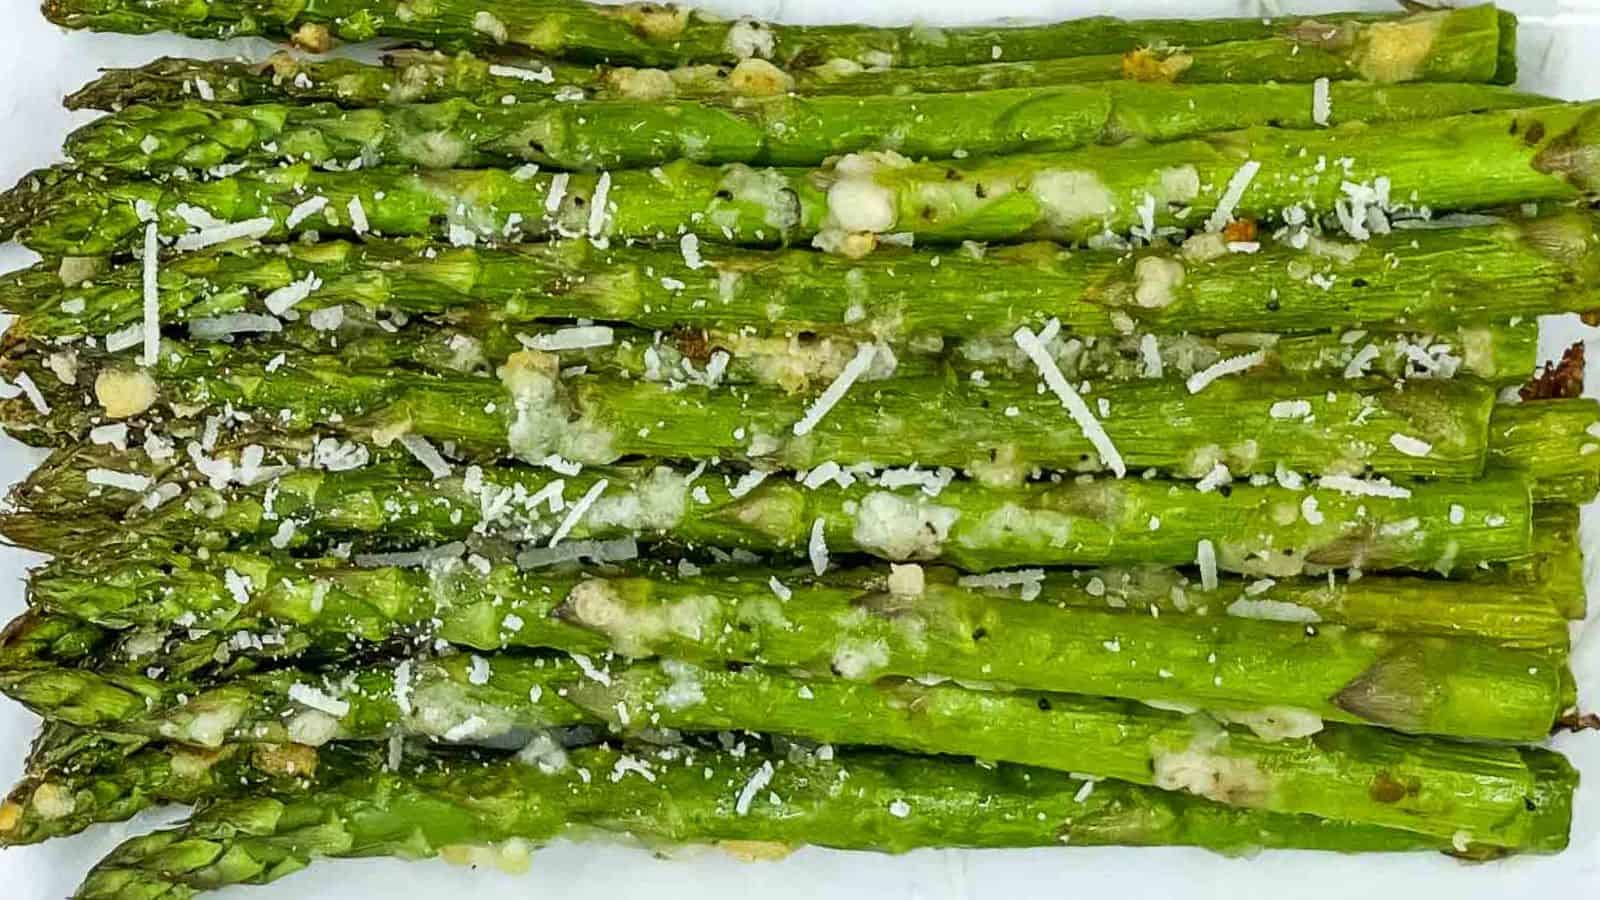 <p>Asparagus in the air fryer is simple and cost-effective. Enjoy this seasonal treat at its best. A great way to add some greens to your meal without a fuss.<br><strong>Get the Recipe: </strong><a href="https://www.splashoftaste.com/air-fryer-asparagus/?utm_source=msn&utm_medium=page&utm_campaign=msn">Air Fryer Asparagus</a></p> <div class="remoji_bar">          <div class="remoji_error_bar">   Error happened.   </div>  </div> <p>The post <a rel="nofollow" href="https://fooddrinklife.com/tight-budget-loosen-up-with-25-air-fryer-recipes/">Tight budget? Loosen up with 25 air fryer recipes!</a> appeared first on <a rel="nofollow" href="https://fooddrinklife.com">Food Drink Life</a>.</p>